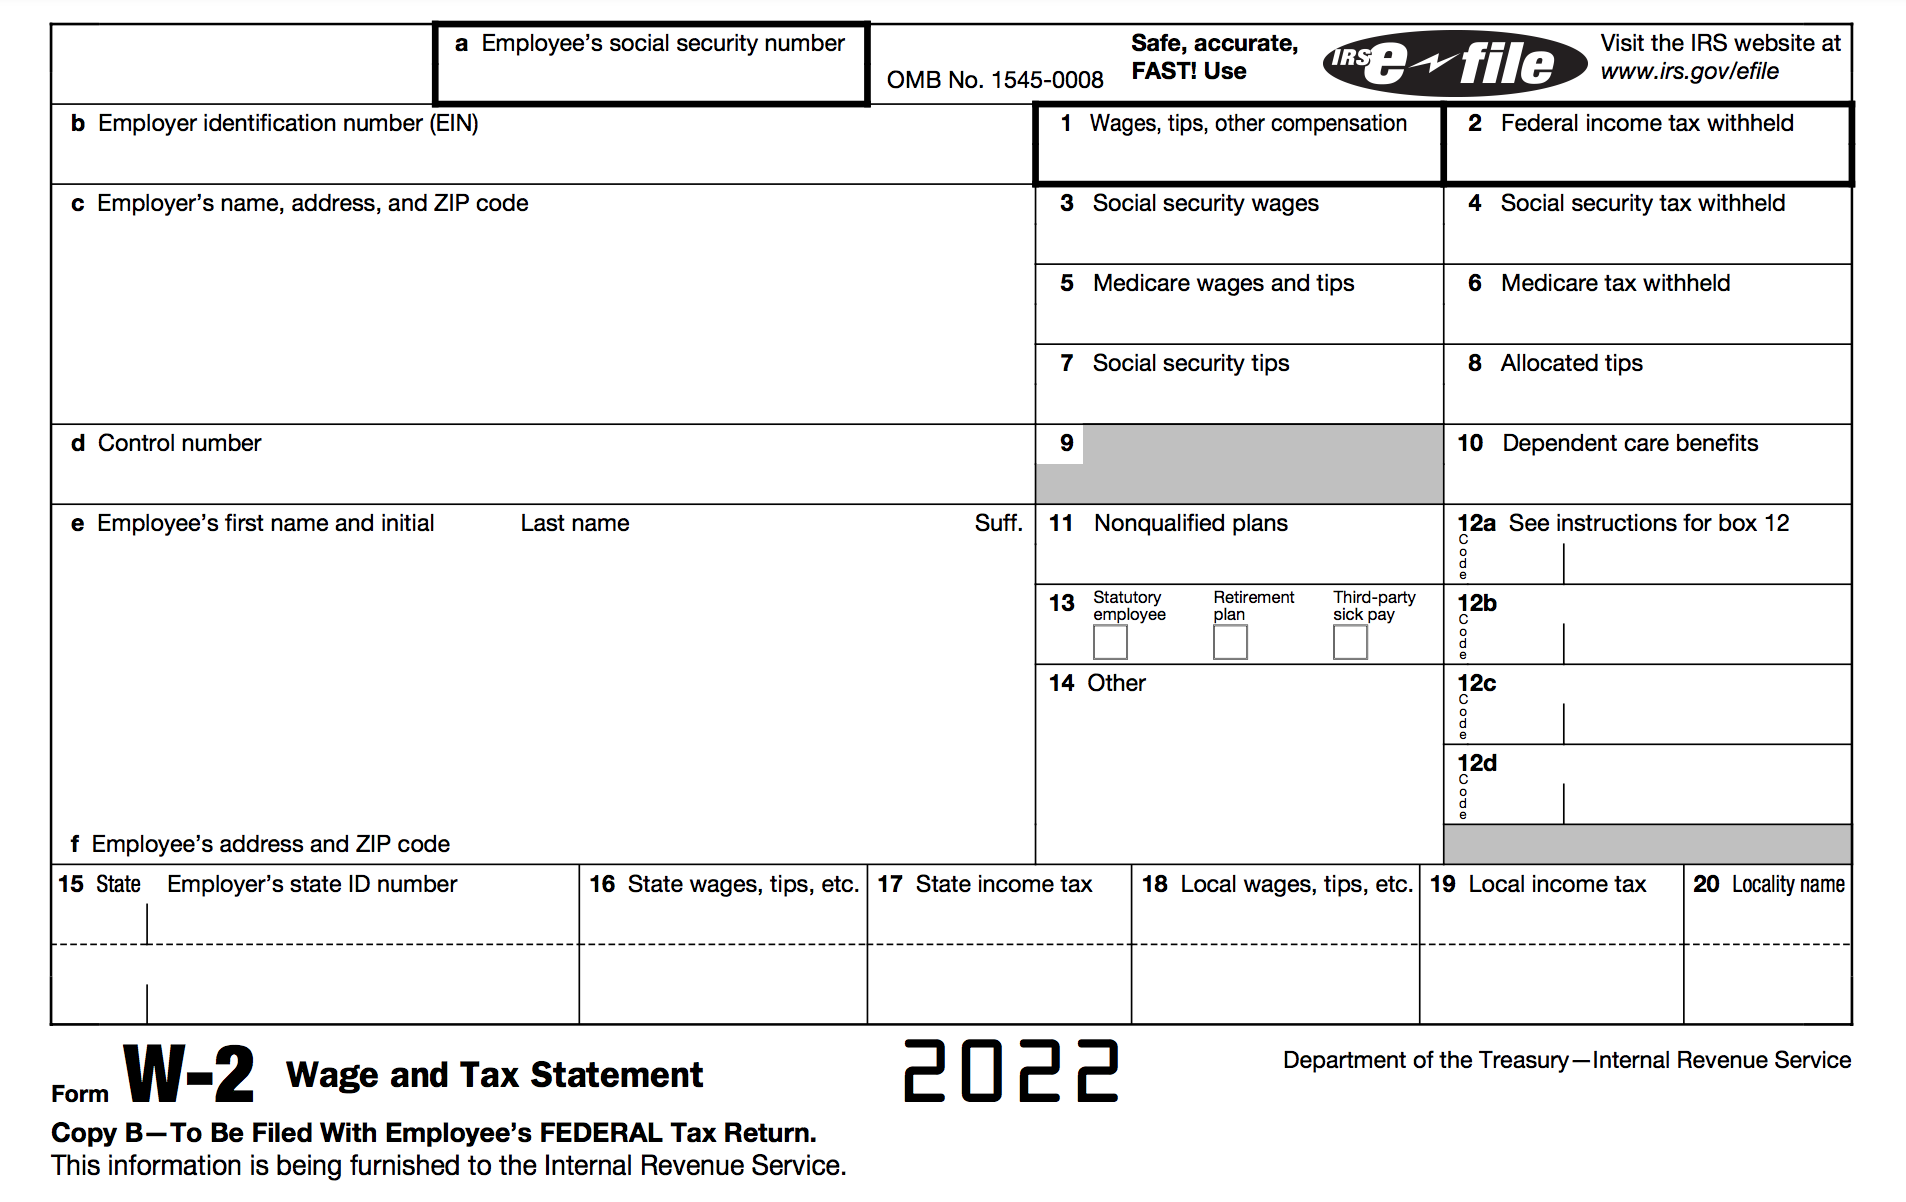 How To Fill Out A W-2 Tax Form | Smartasset pertaining to Aafes W2 Former Employee